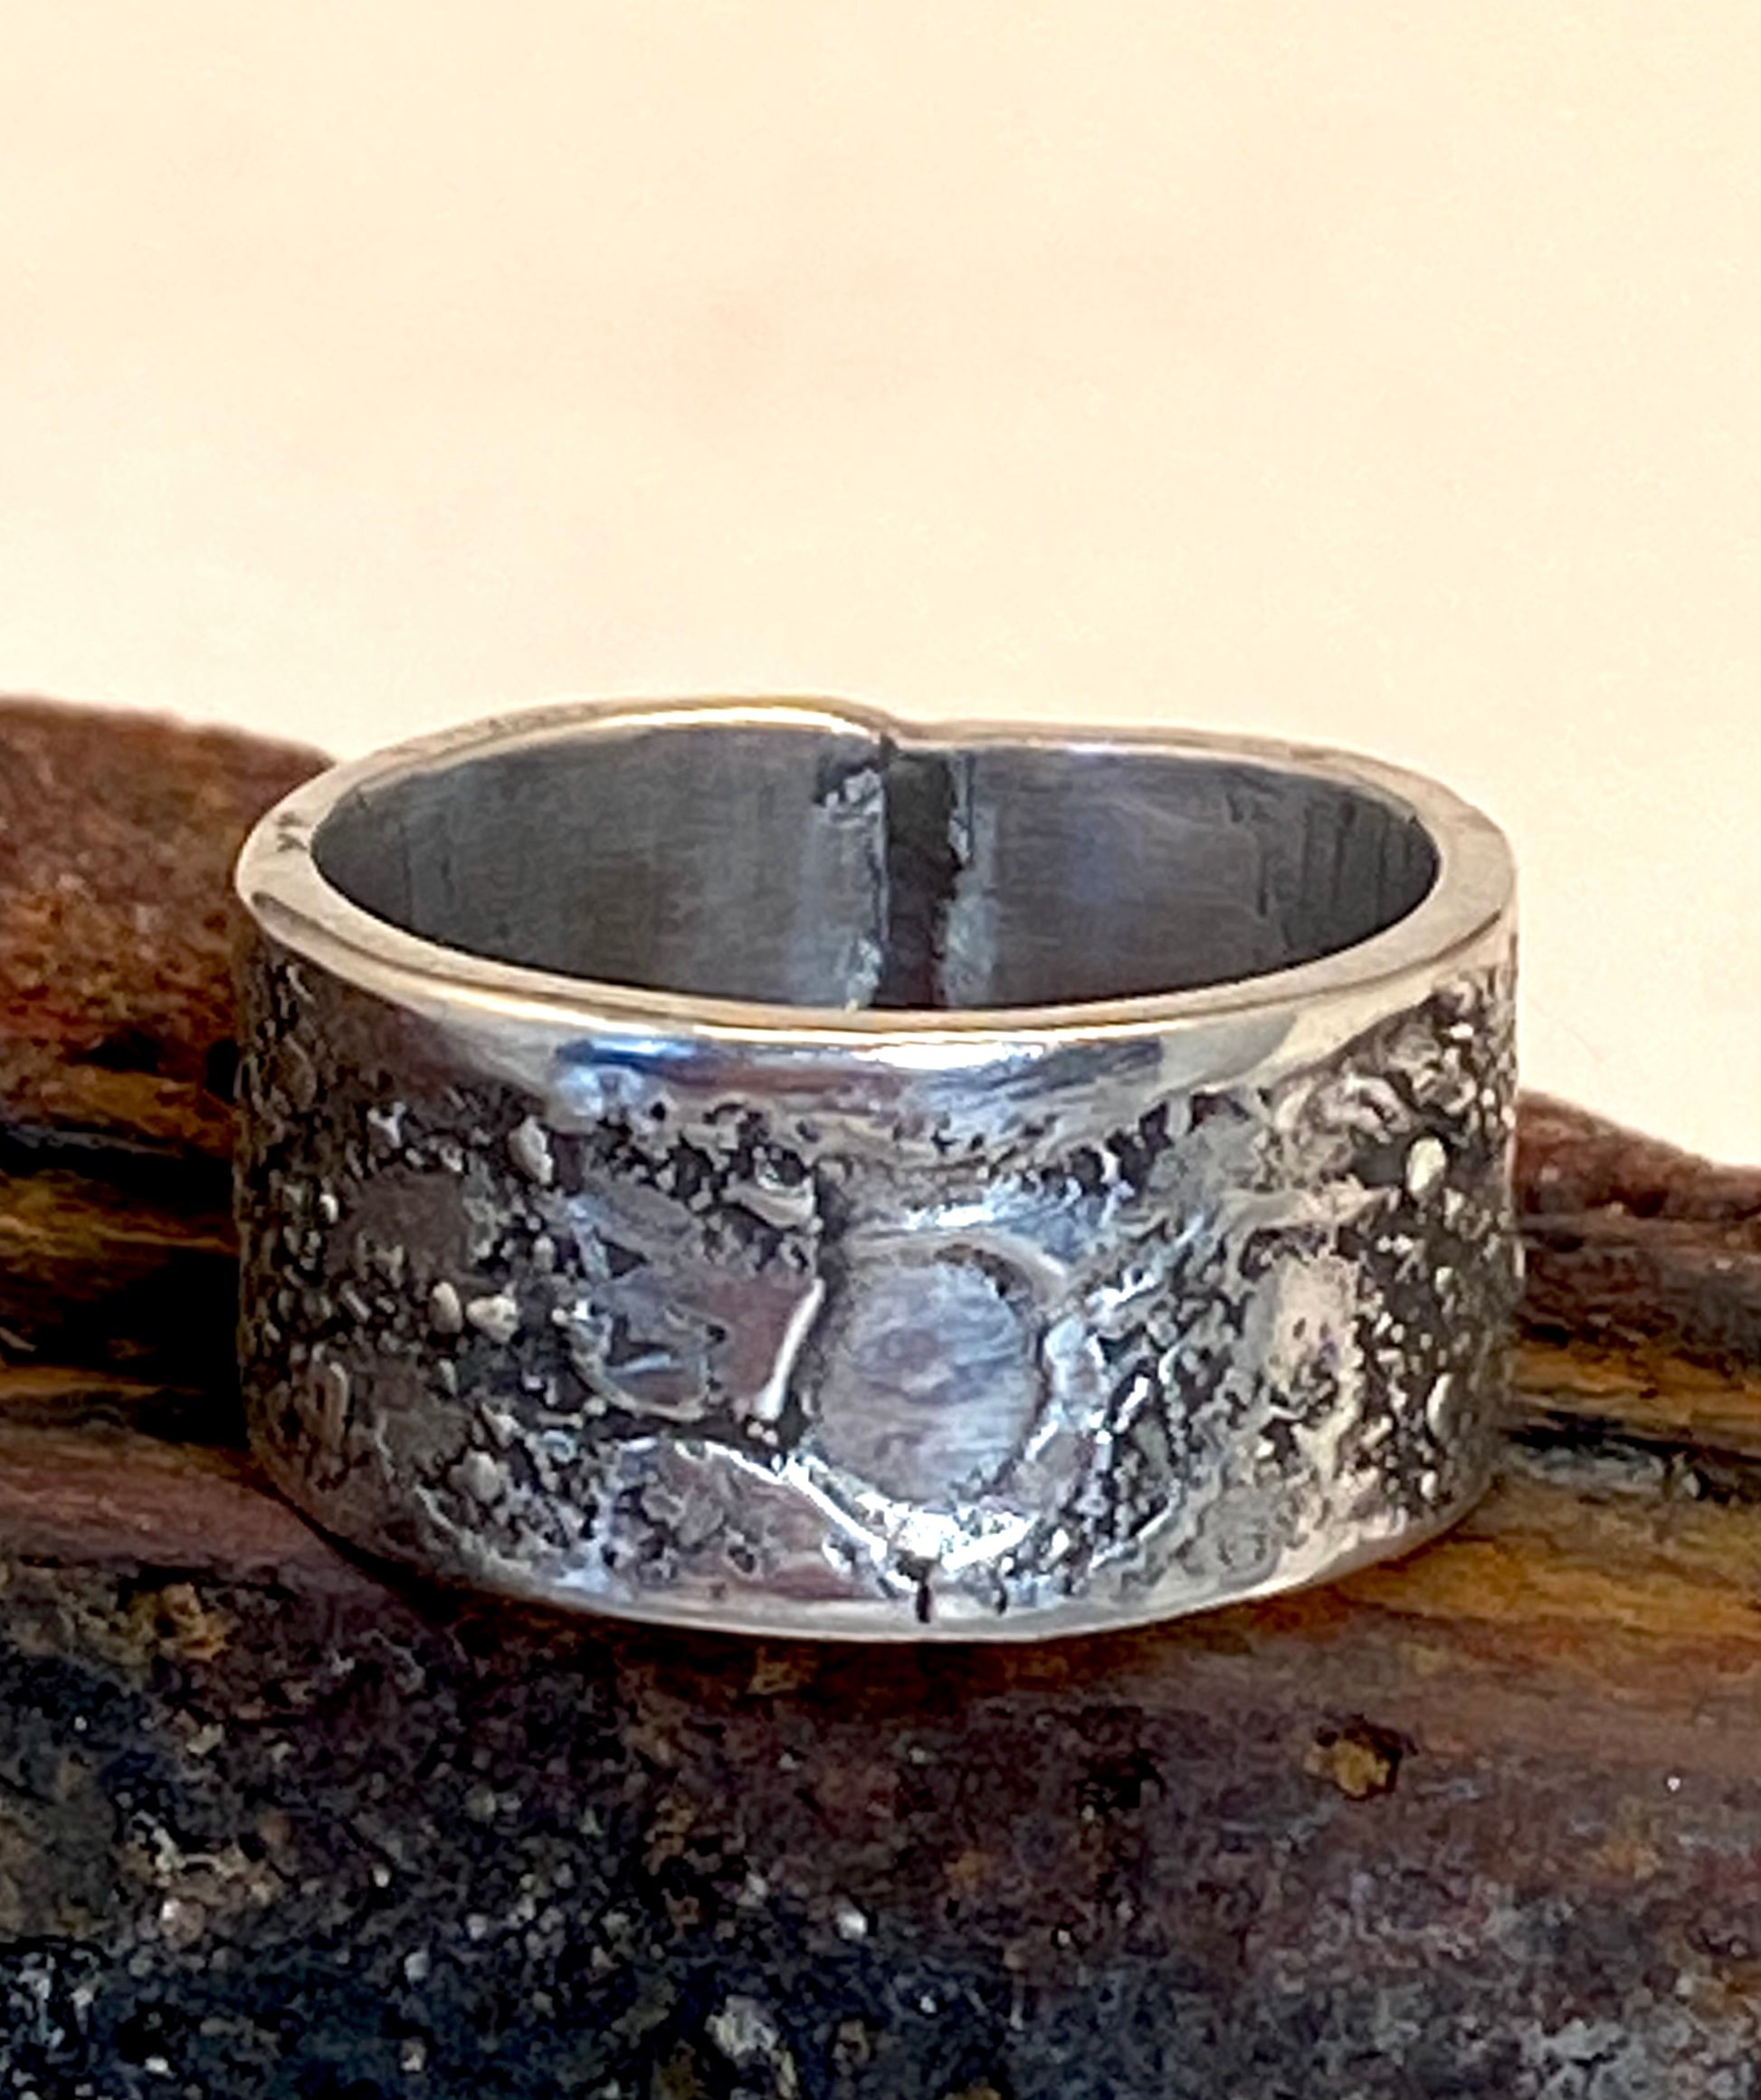 One-of-a-kind hand-crafted sterling silver cigar band ring, beautifully textured with fused silver dust ad with gorgeous organic patina. Ring size 6. Style: rustic, boho, funky, organic, earthy yet elegant.